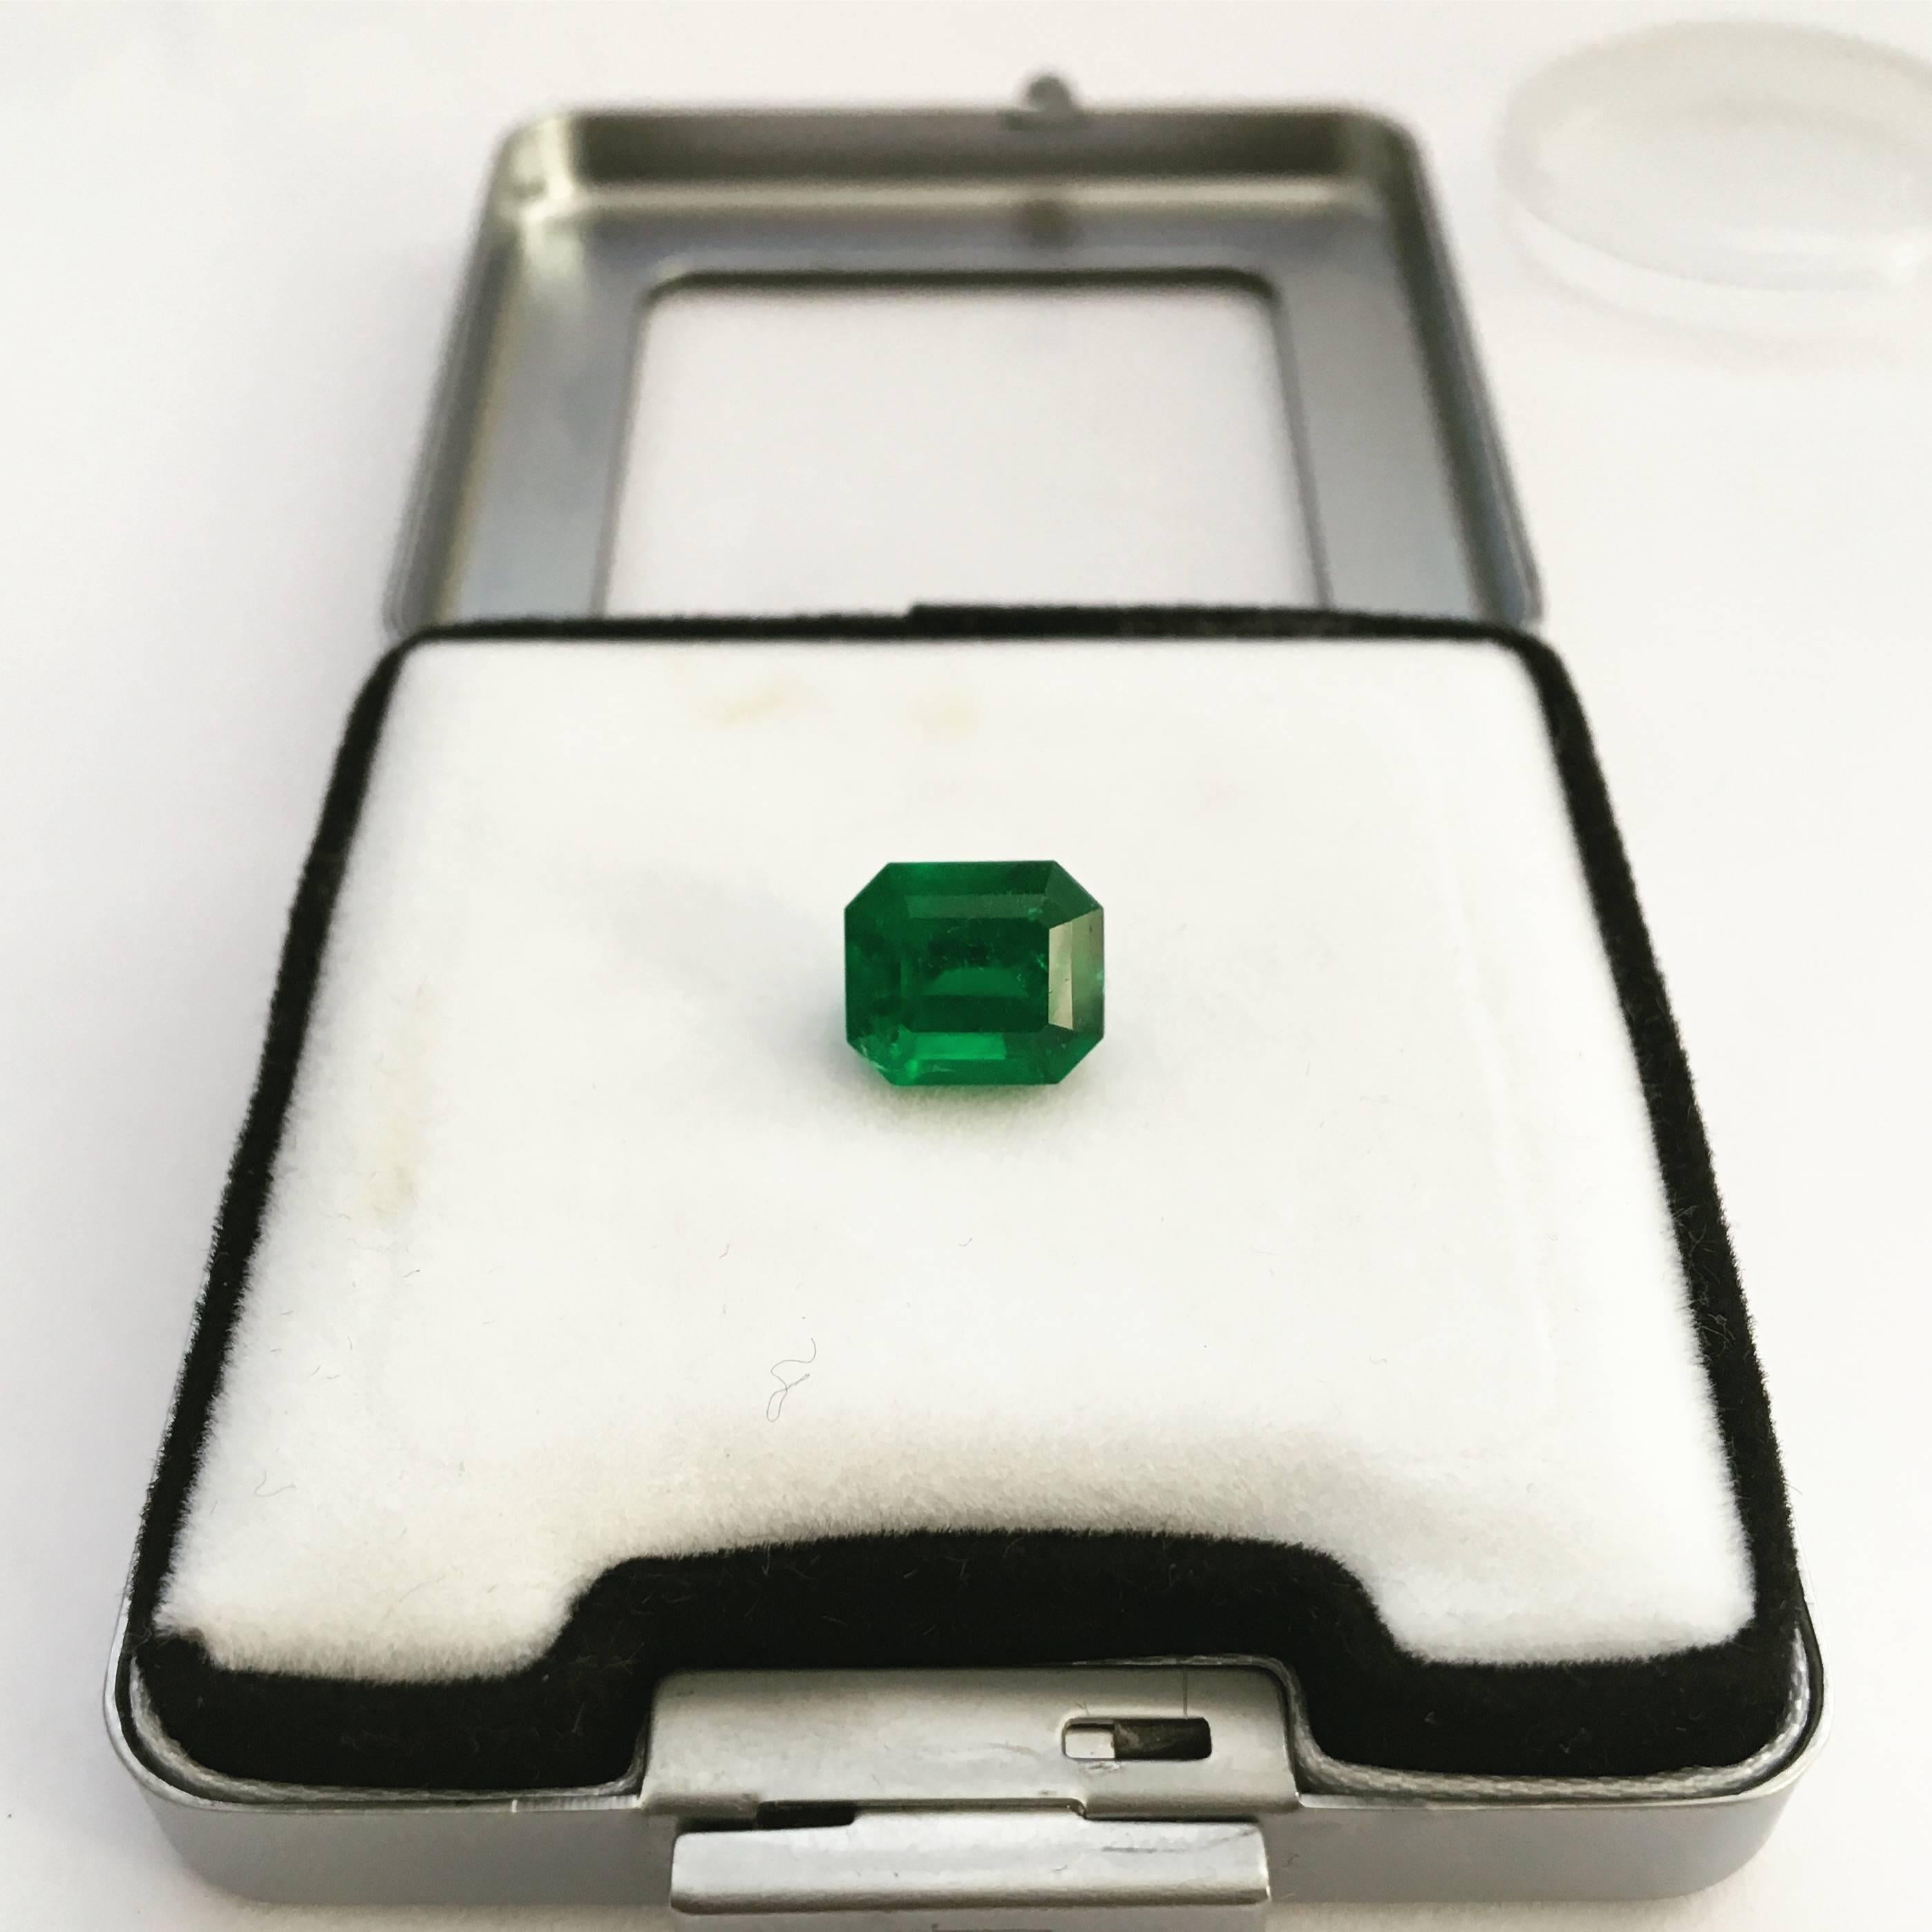 2.93 carat, emerald cut, certified blueish-green Colombian emerald of natural origin and fine quality.  Indications of insignificant clarity enhancement with cedar oil.

9.22mm x 7.99mm x 6.29mm

Certified retail price per carat: >$17,500 X 0.81 =